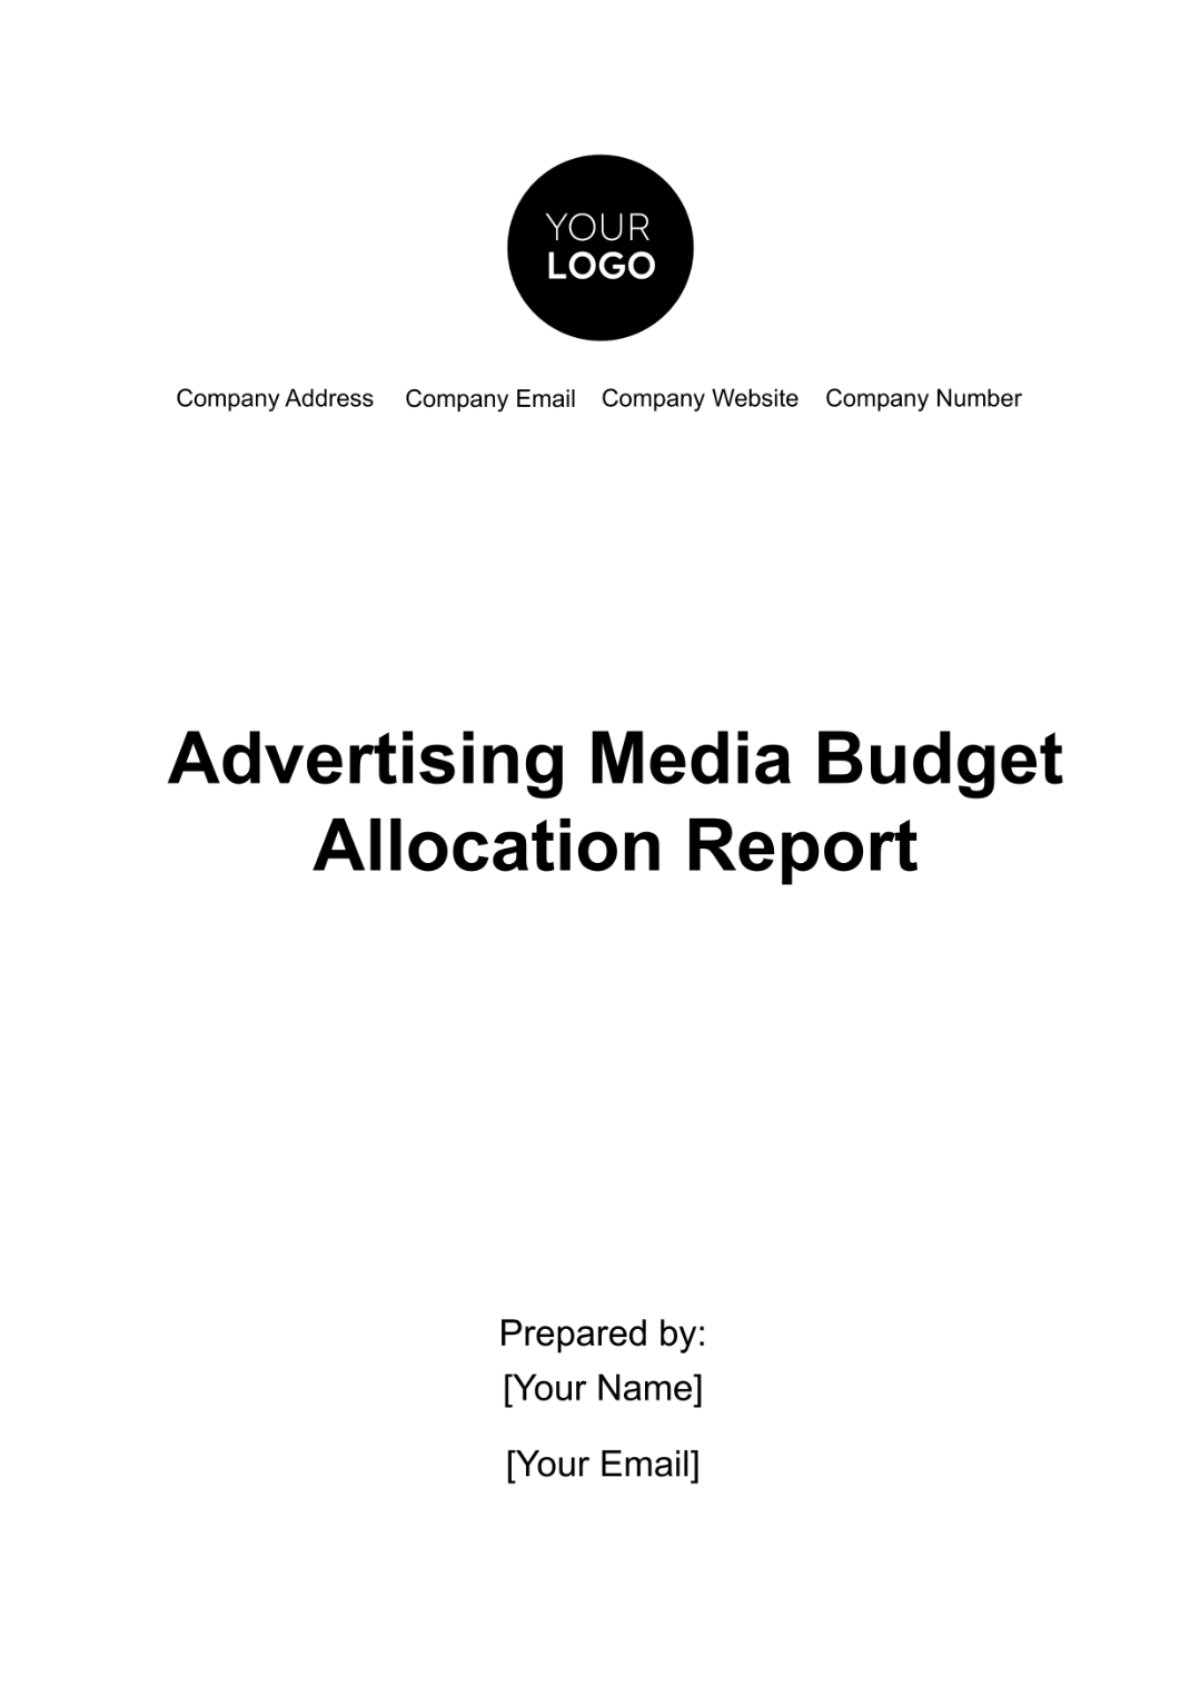 Free Advertising Media Budget Allocation Report Template